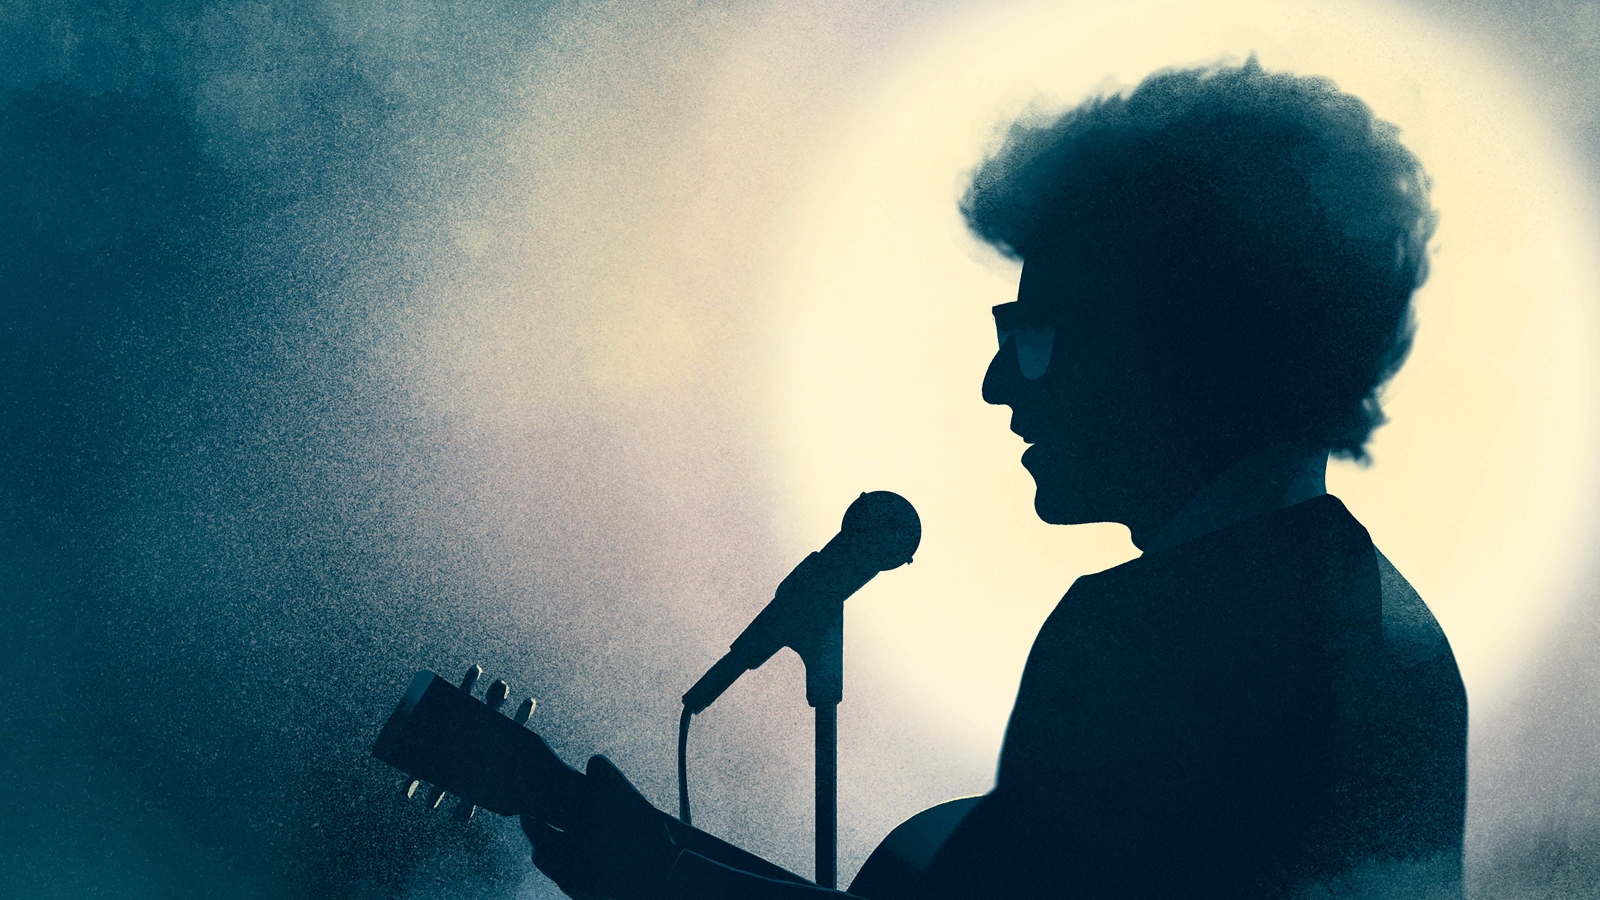 Digital Illustration of silhouetted Bob Dylan singing into a microphone and playing guitar. The background is bright around him, but fades to a darker color the further away it gets.